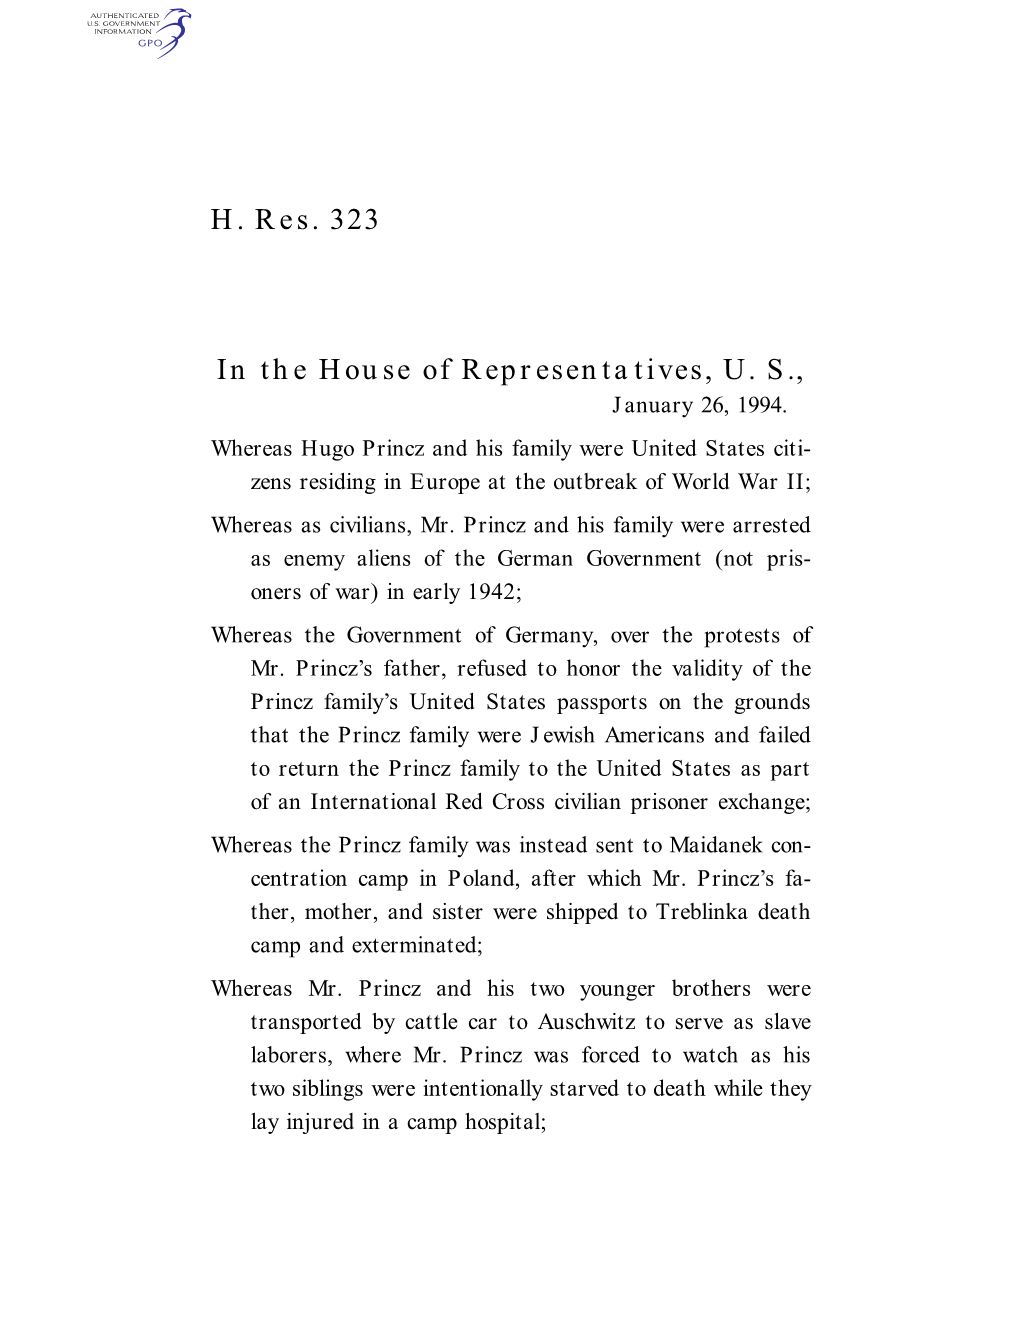 H. Res. 323 in the House of Representatives, U